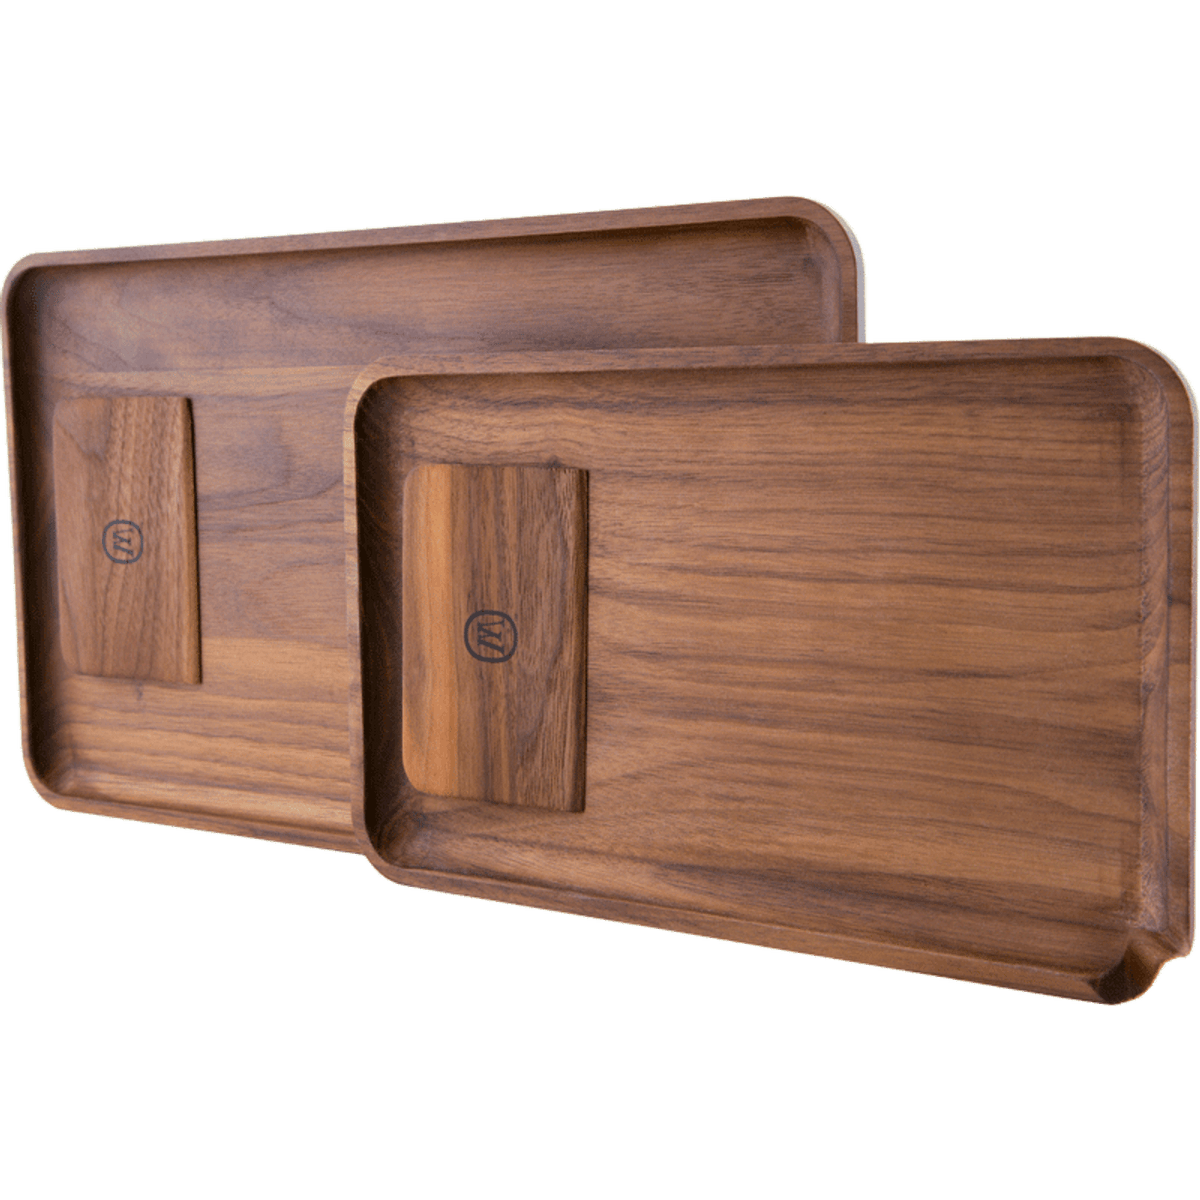 Wooden Rolling Tray by Marley Natural Marley Natural